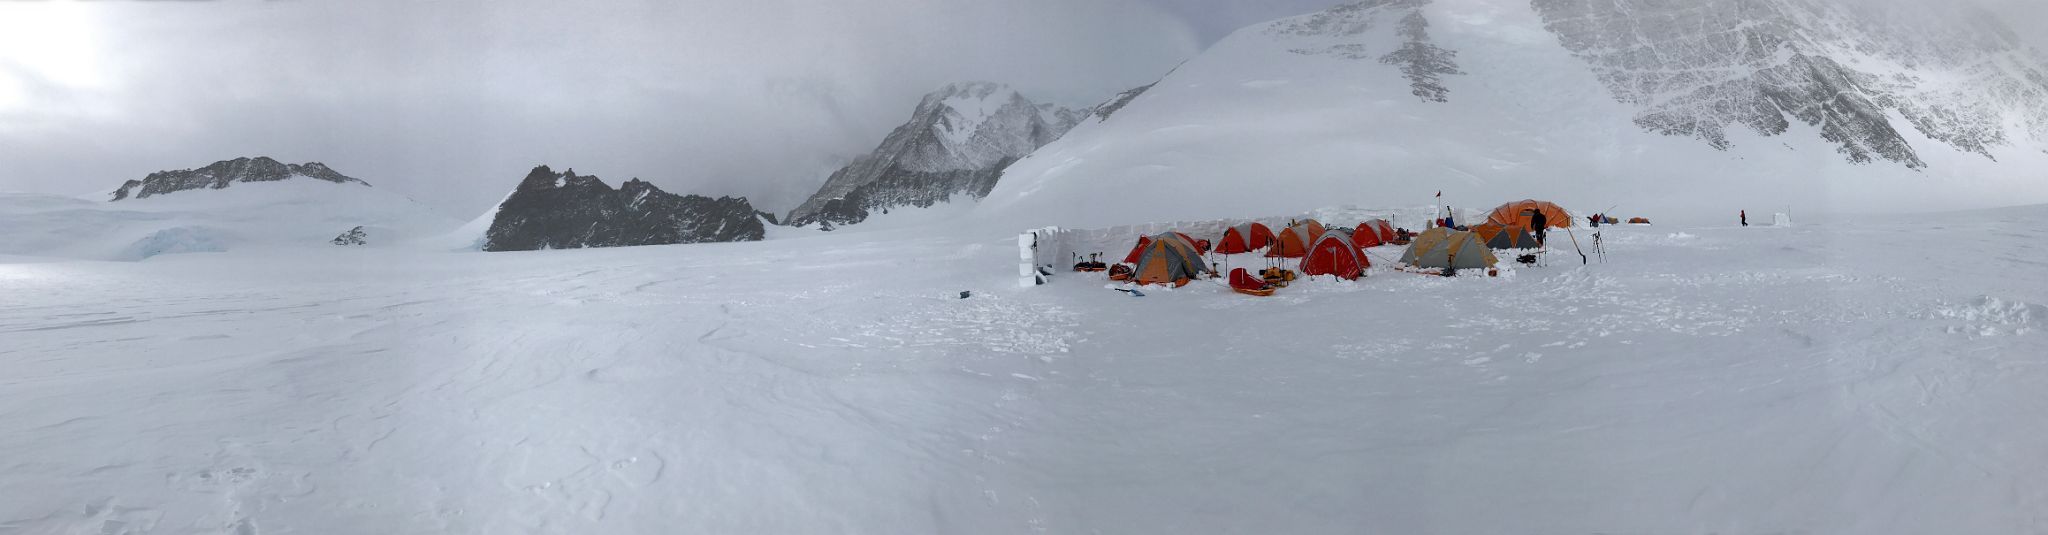 10A It Turned Cloudy With Knutsen Peak And Mount Shinn At The End Of Day 4 With The Tents Of Mount Vinson Low Camp